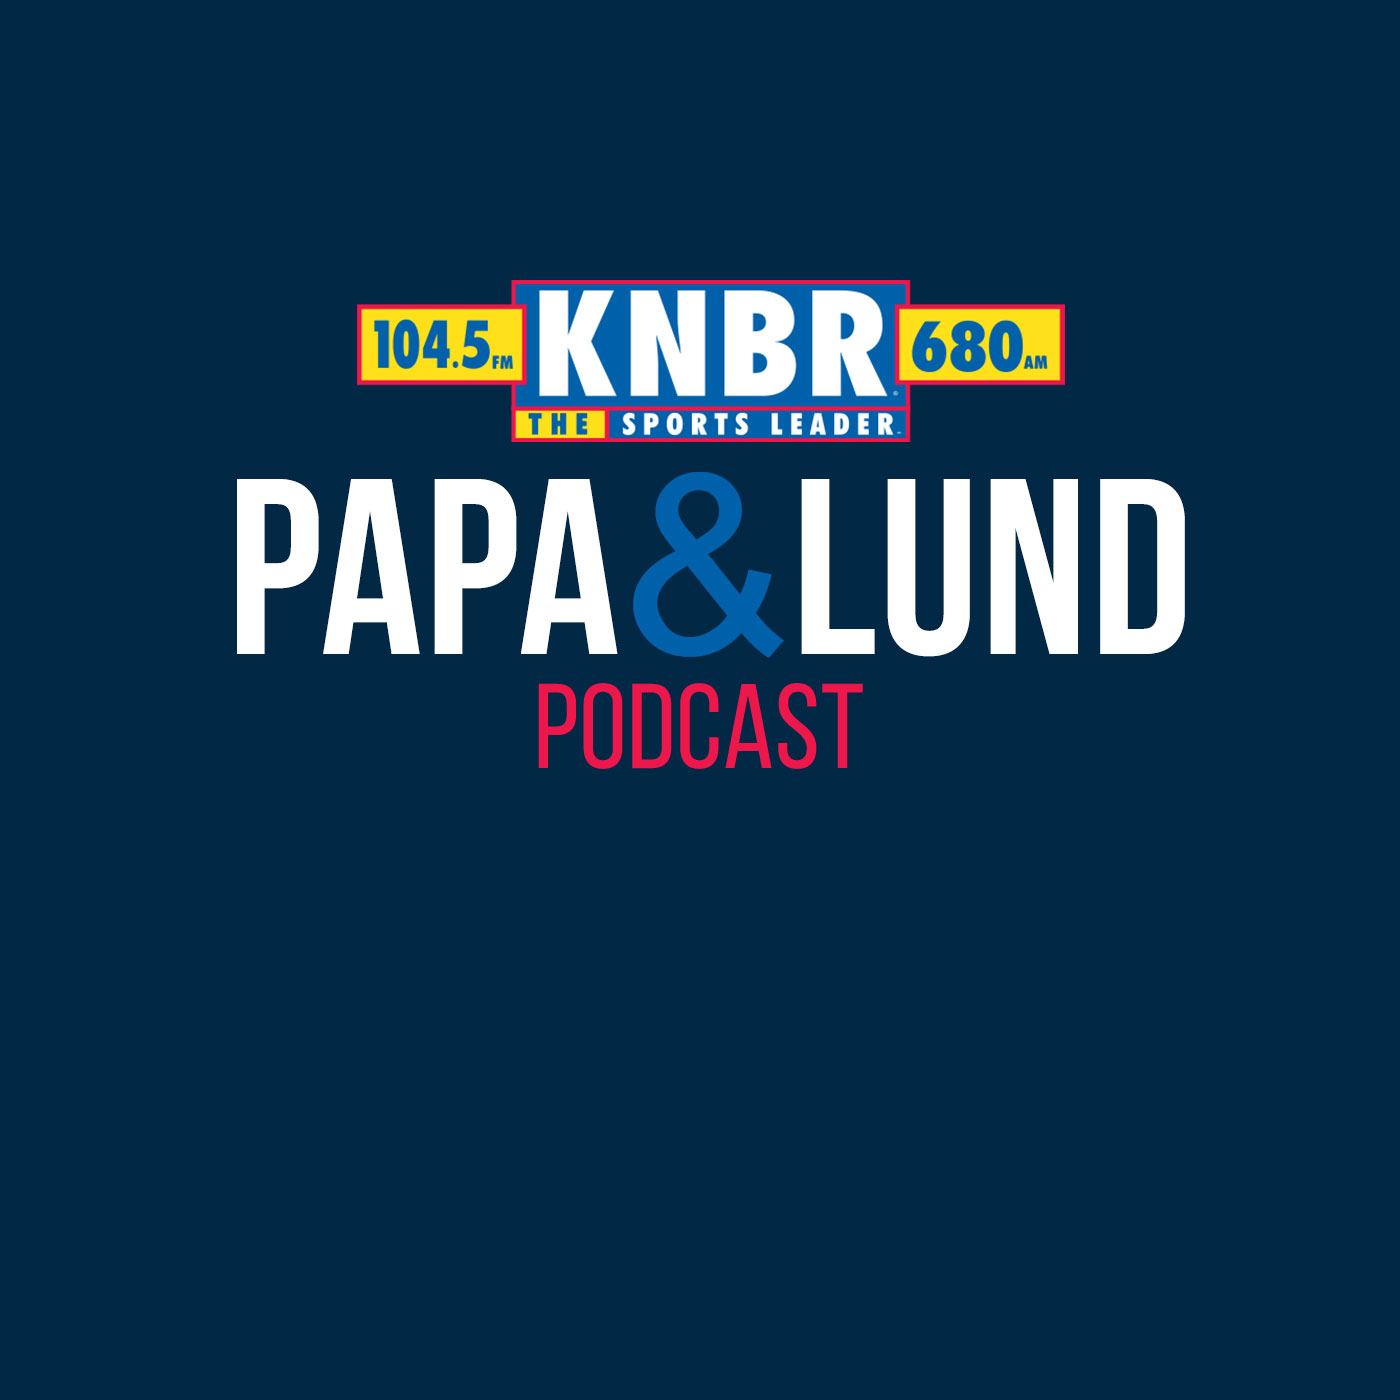 3-6 David Lombardi joins Papa & Lund to discuss the 49ers biggest needs that they need to address in the NFL Draft and NFL Free Agency